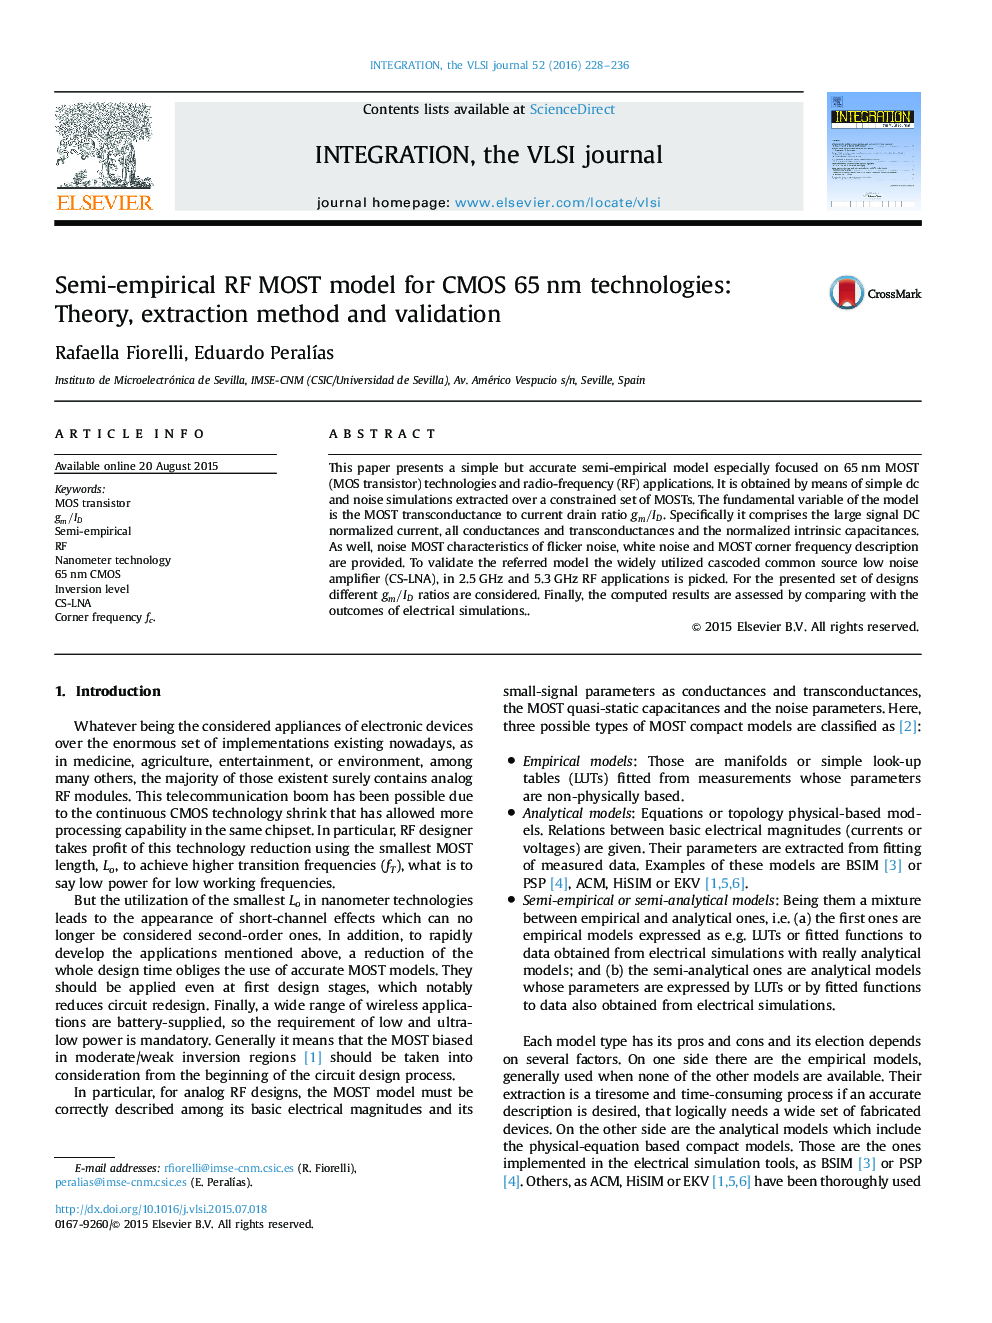 Semi-empirical RF MOST model for CMOS 65 nm technologies: Theory, extraction method and validation